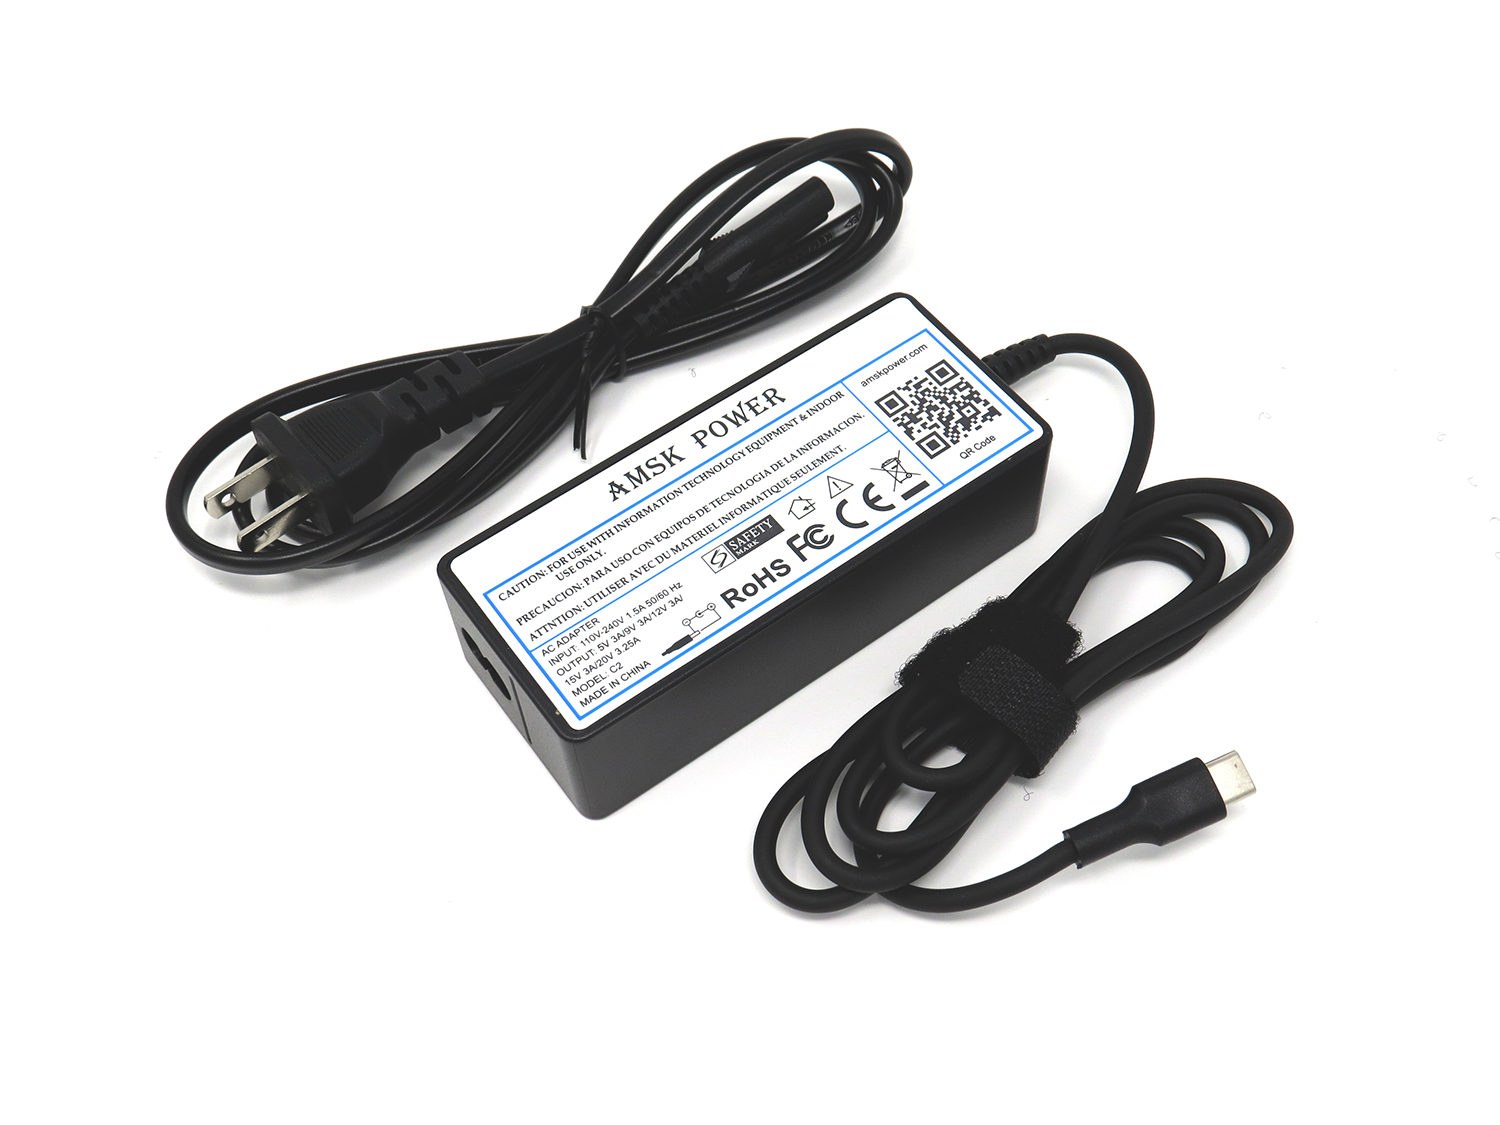 AMSK POWER Ac Adapter USB-C Charger 65W for Asus Chromebook C302 C302C C302CA Power Supply - image 1 of 1